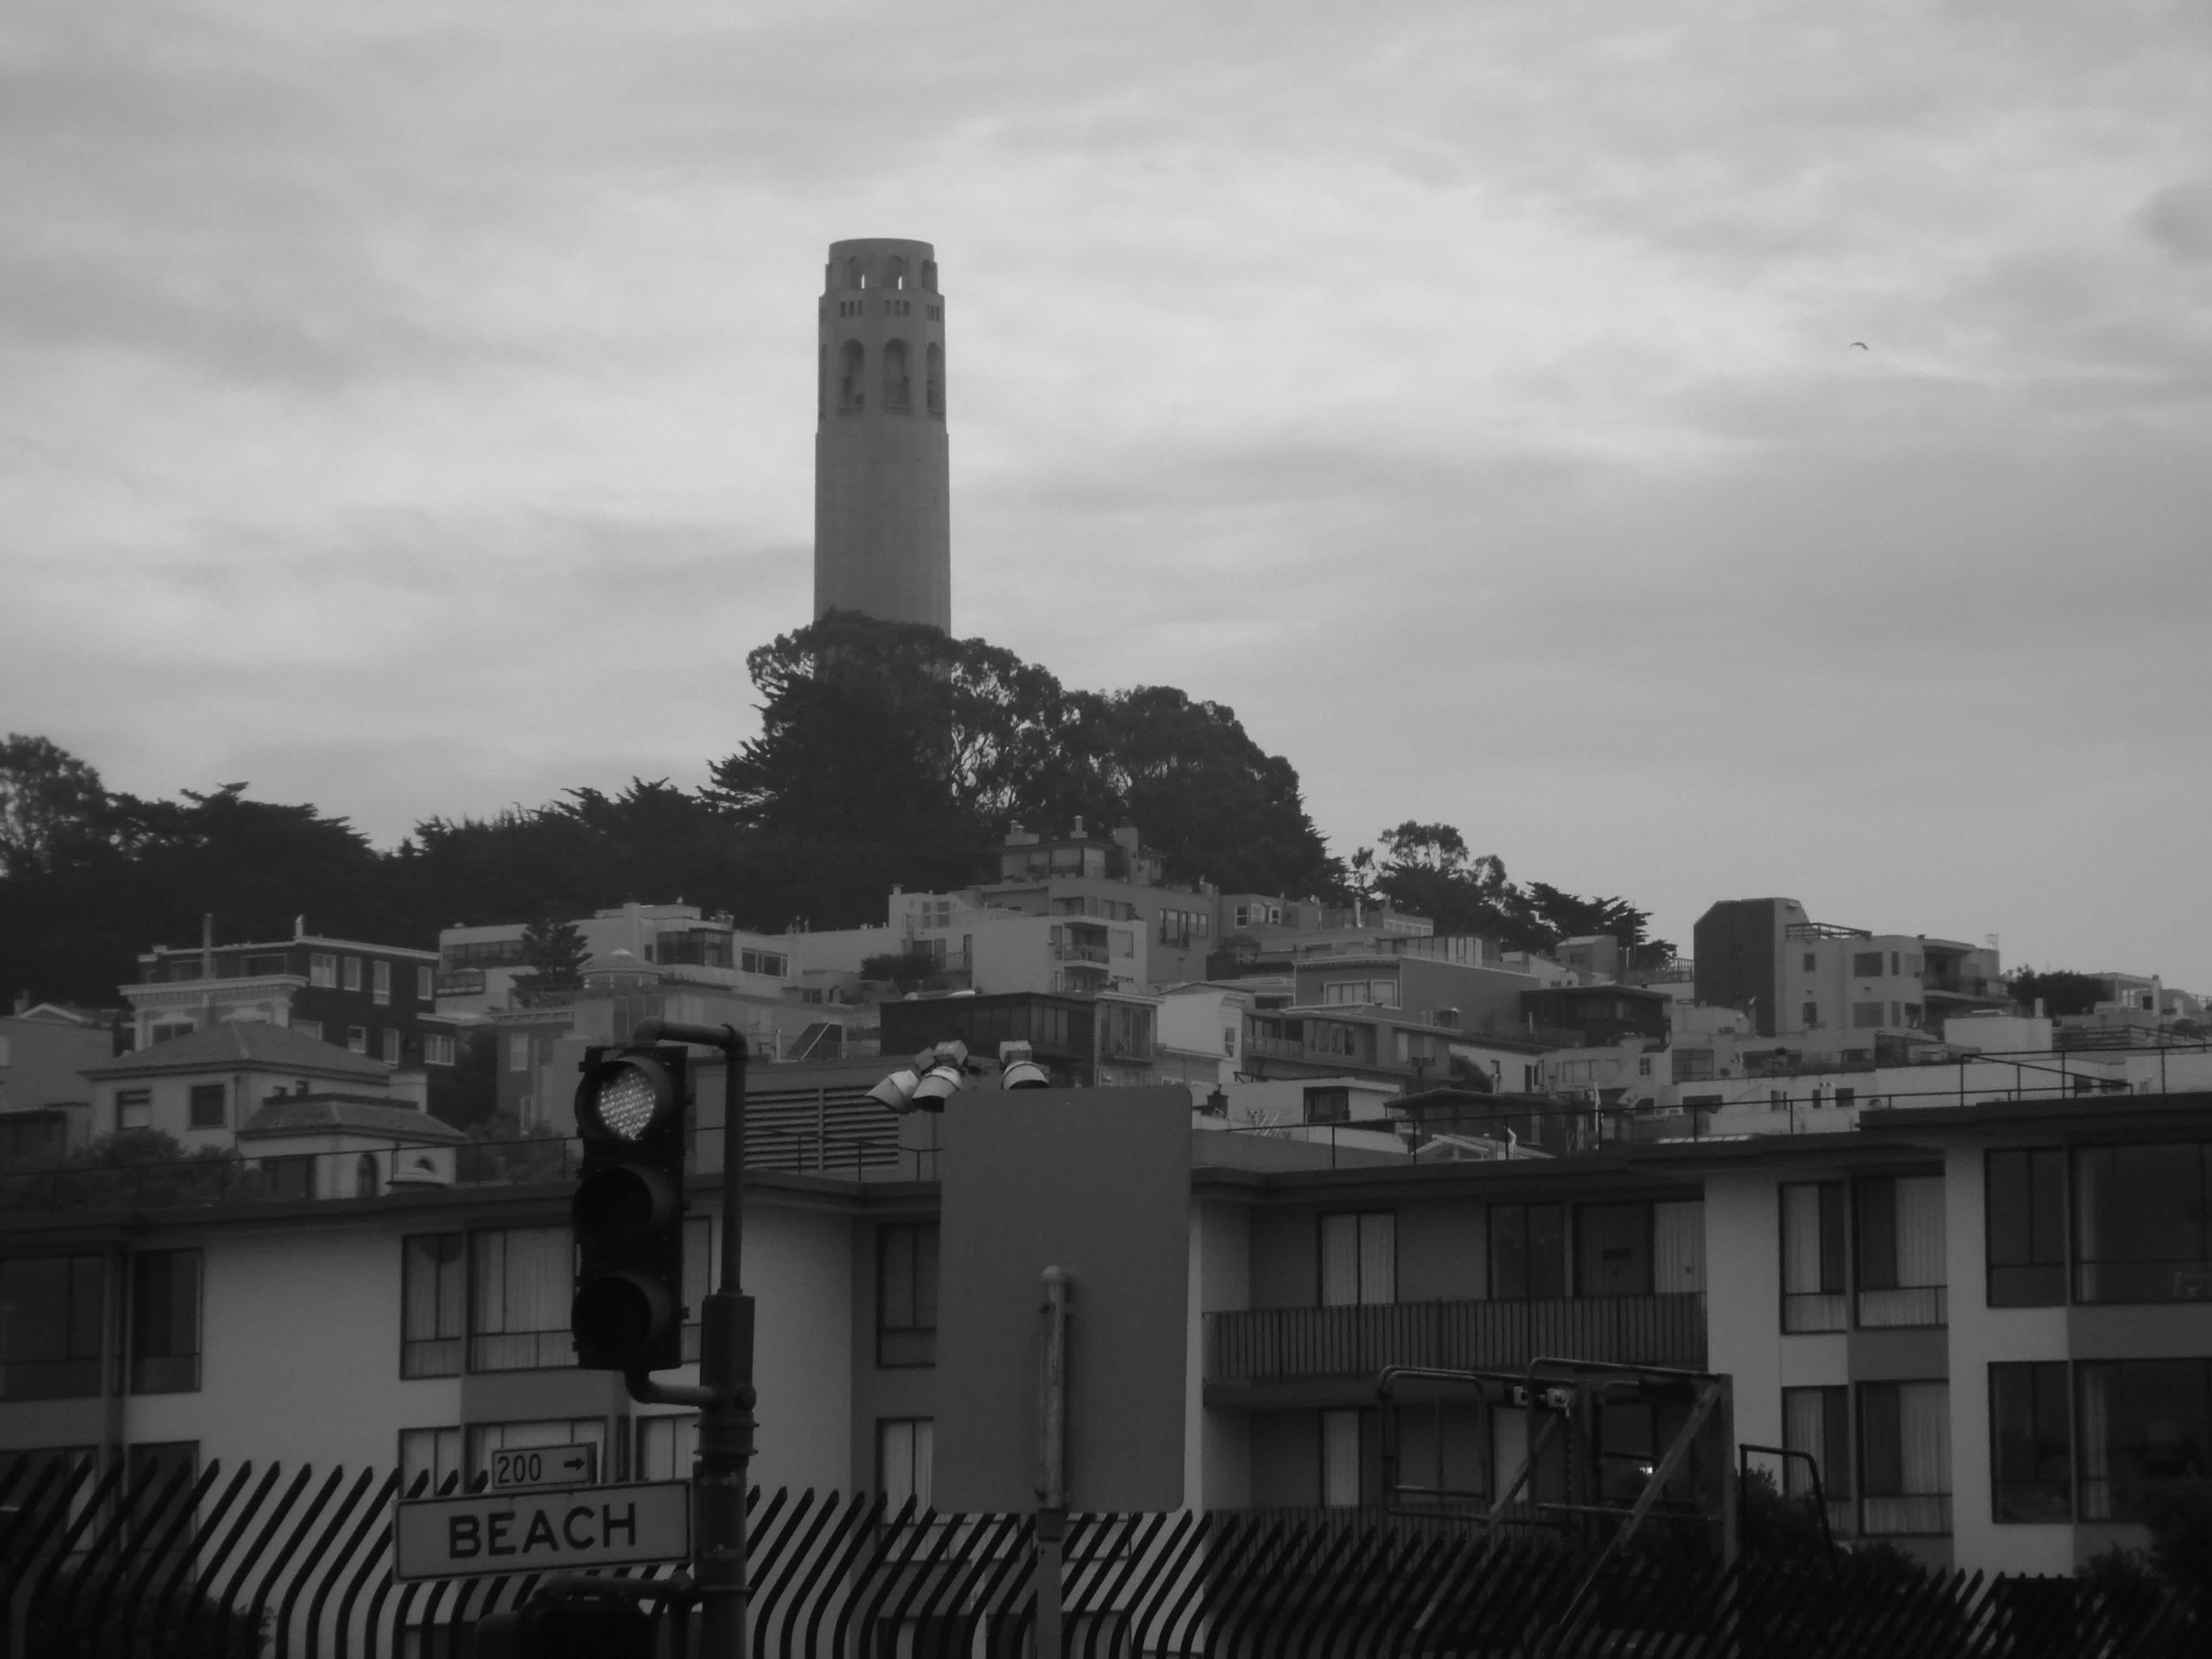 Buildings with a tall tower in the background in black and white in Embarcadero, San Francisco, California.